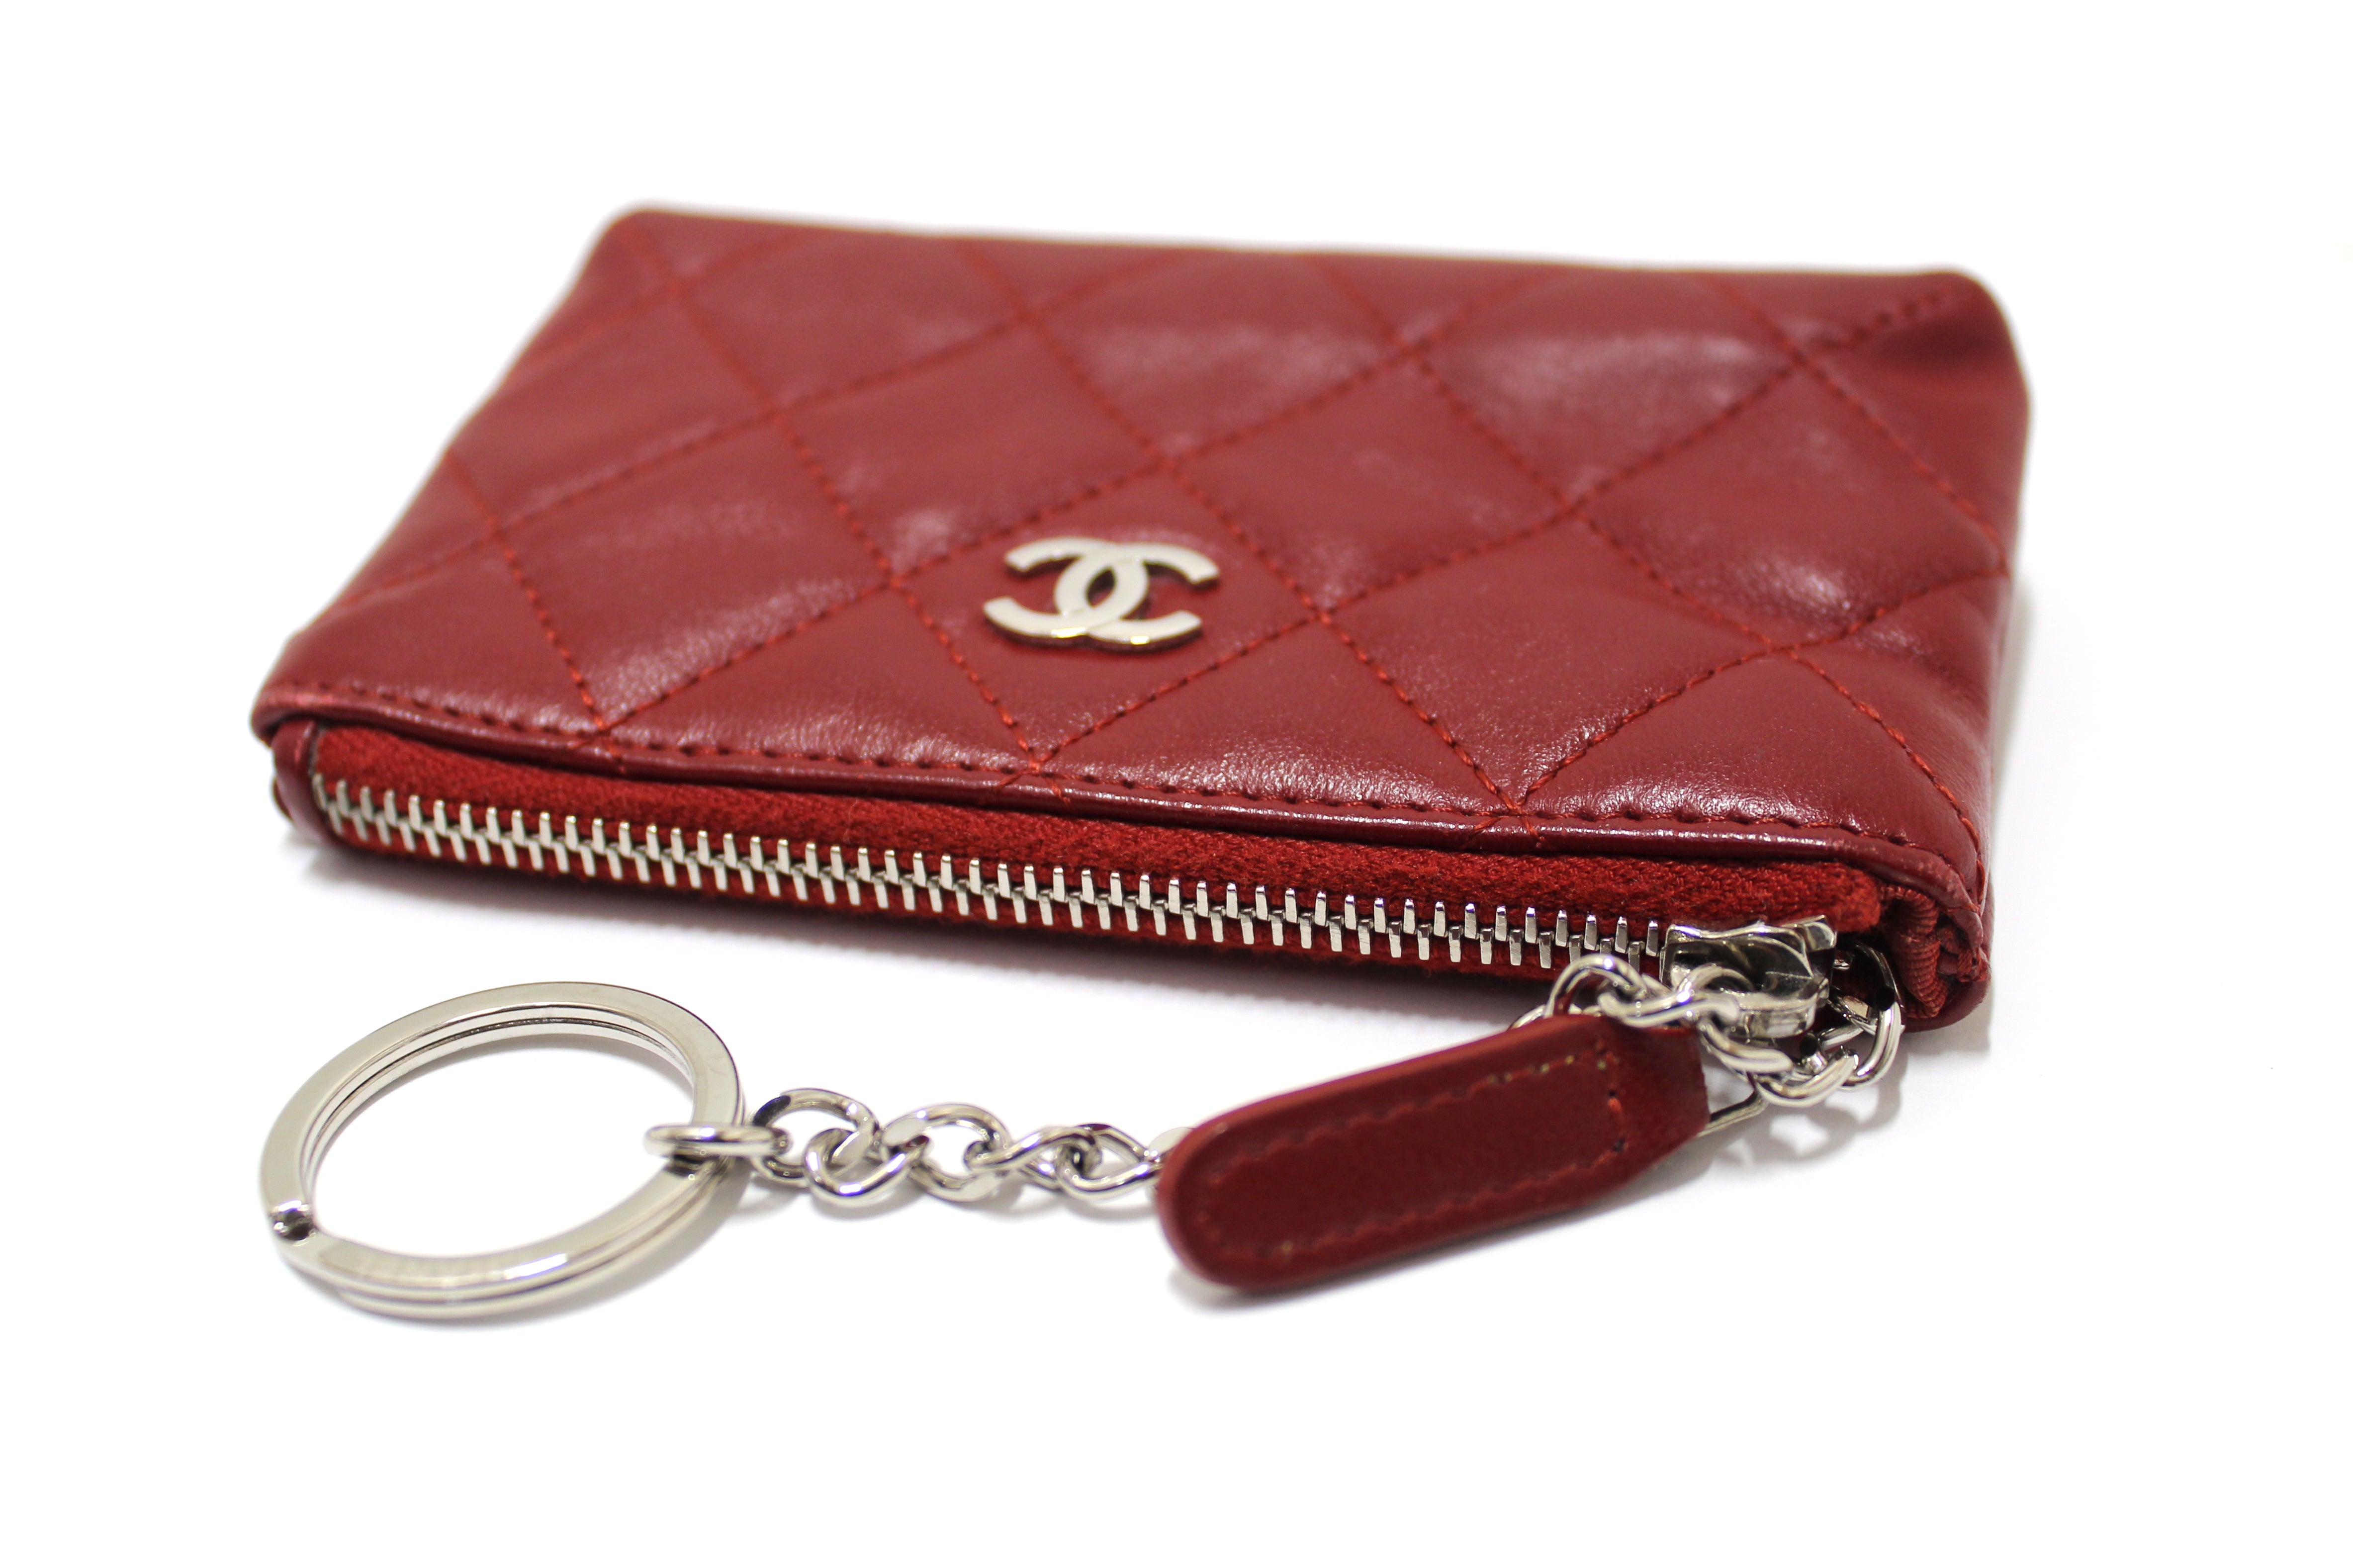 Chanel 2011 Red Lambskin Key Pouch · INTO